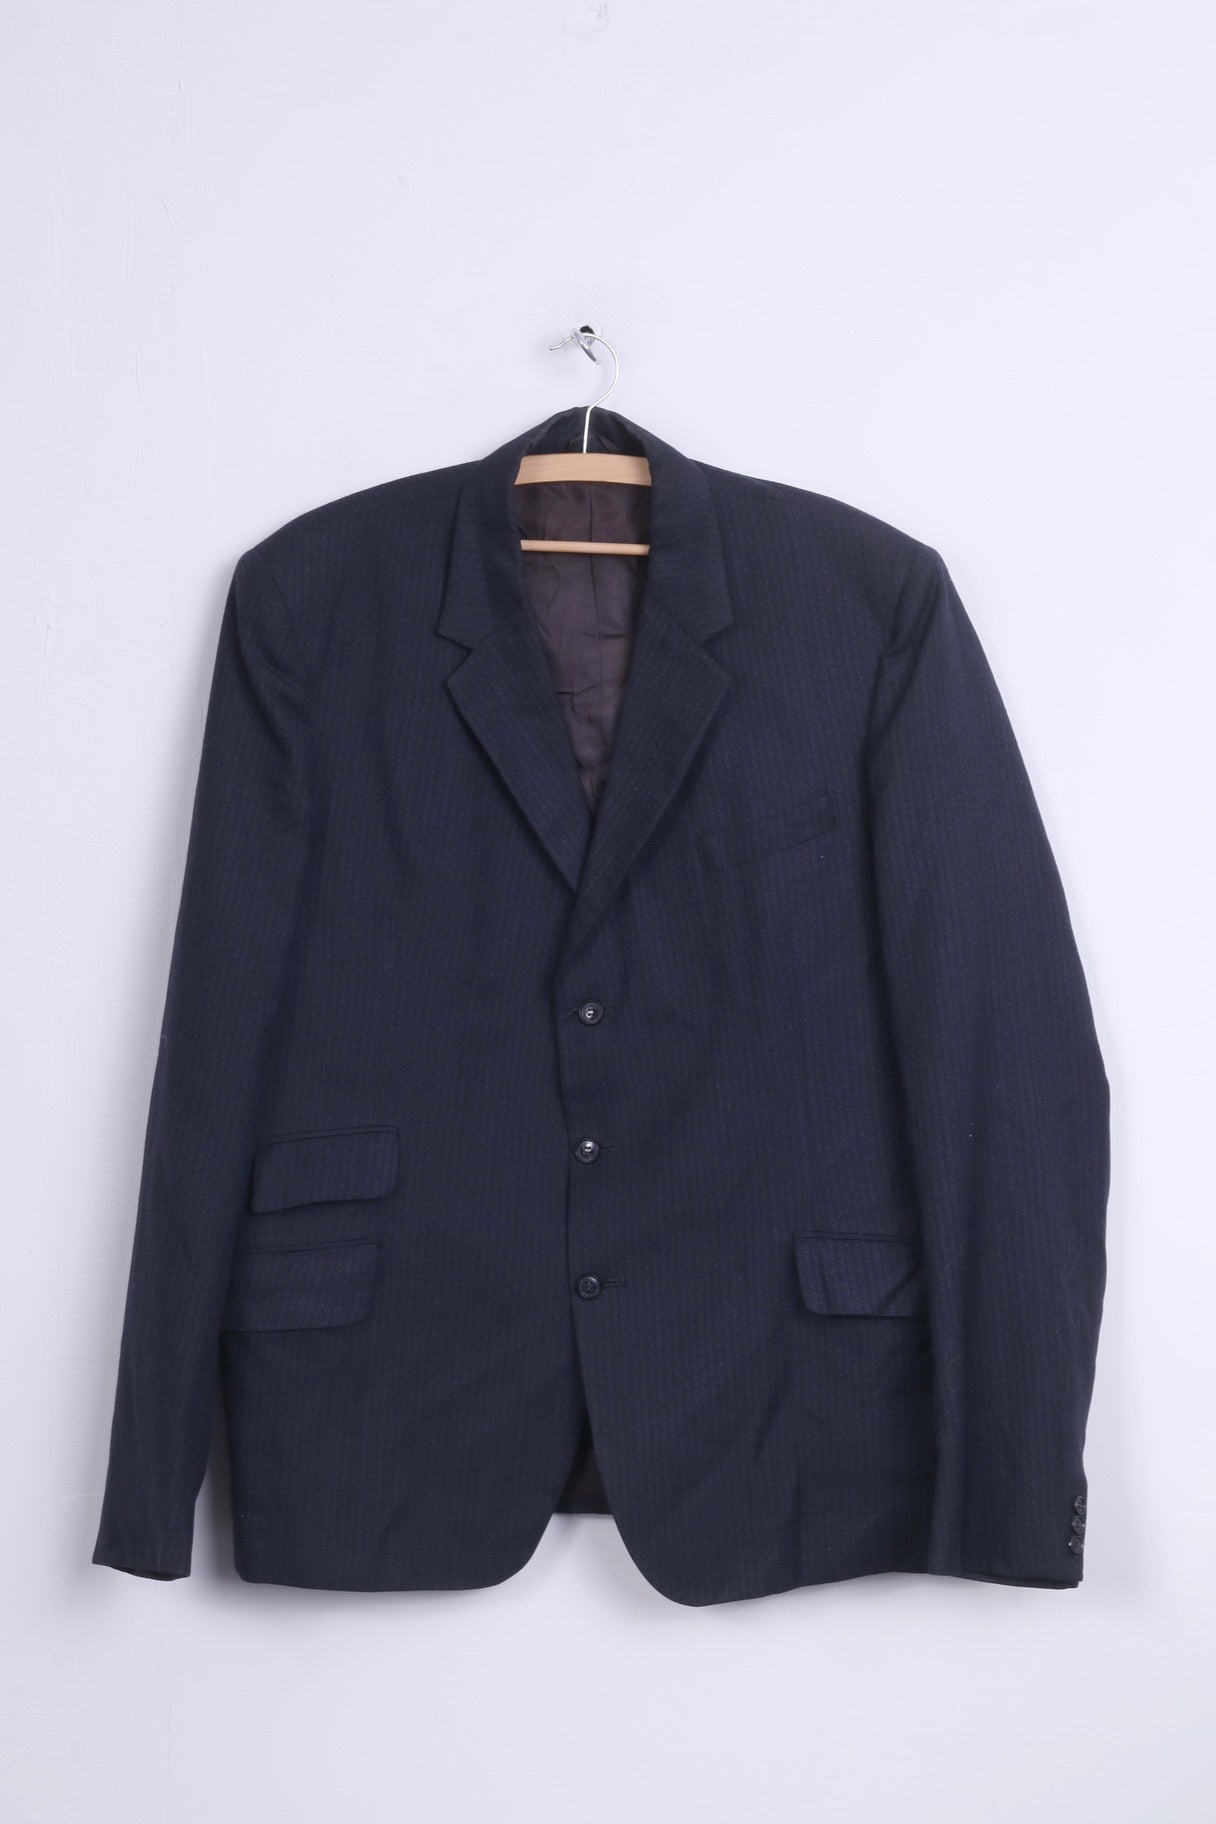 dc for John Collier Mens 54 XL Blazer Navy Striped Wool Single Breasted Vintage Jacket